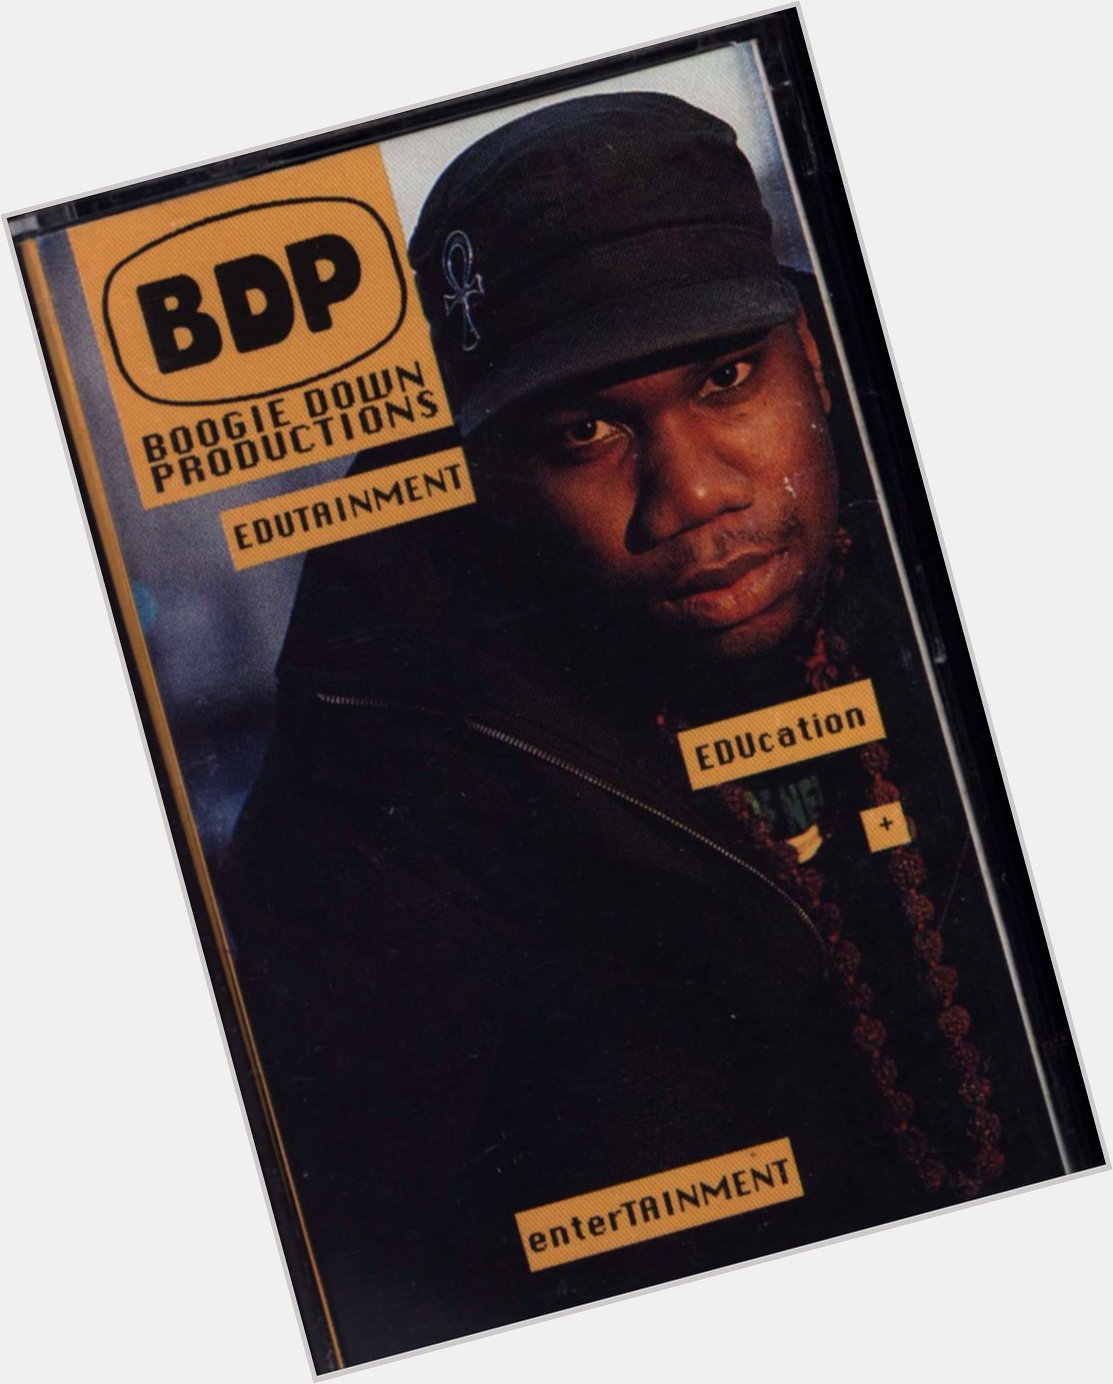 Happy Birthday to the GOAT - KRS One!    